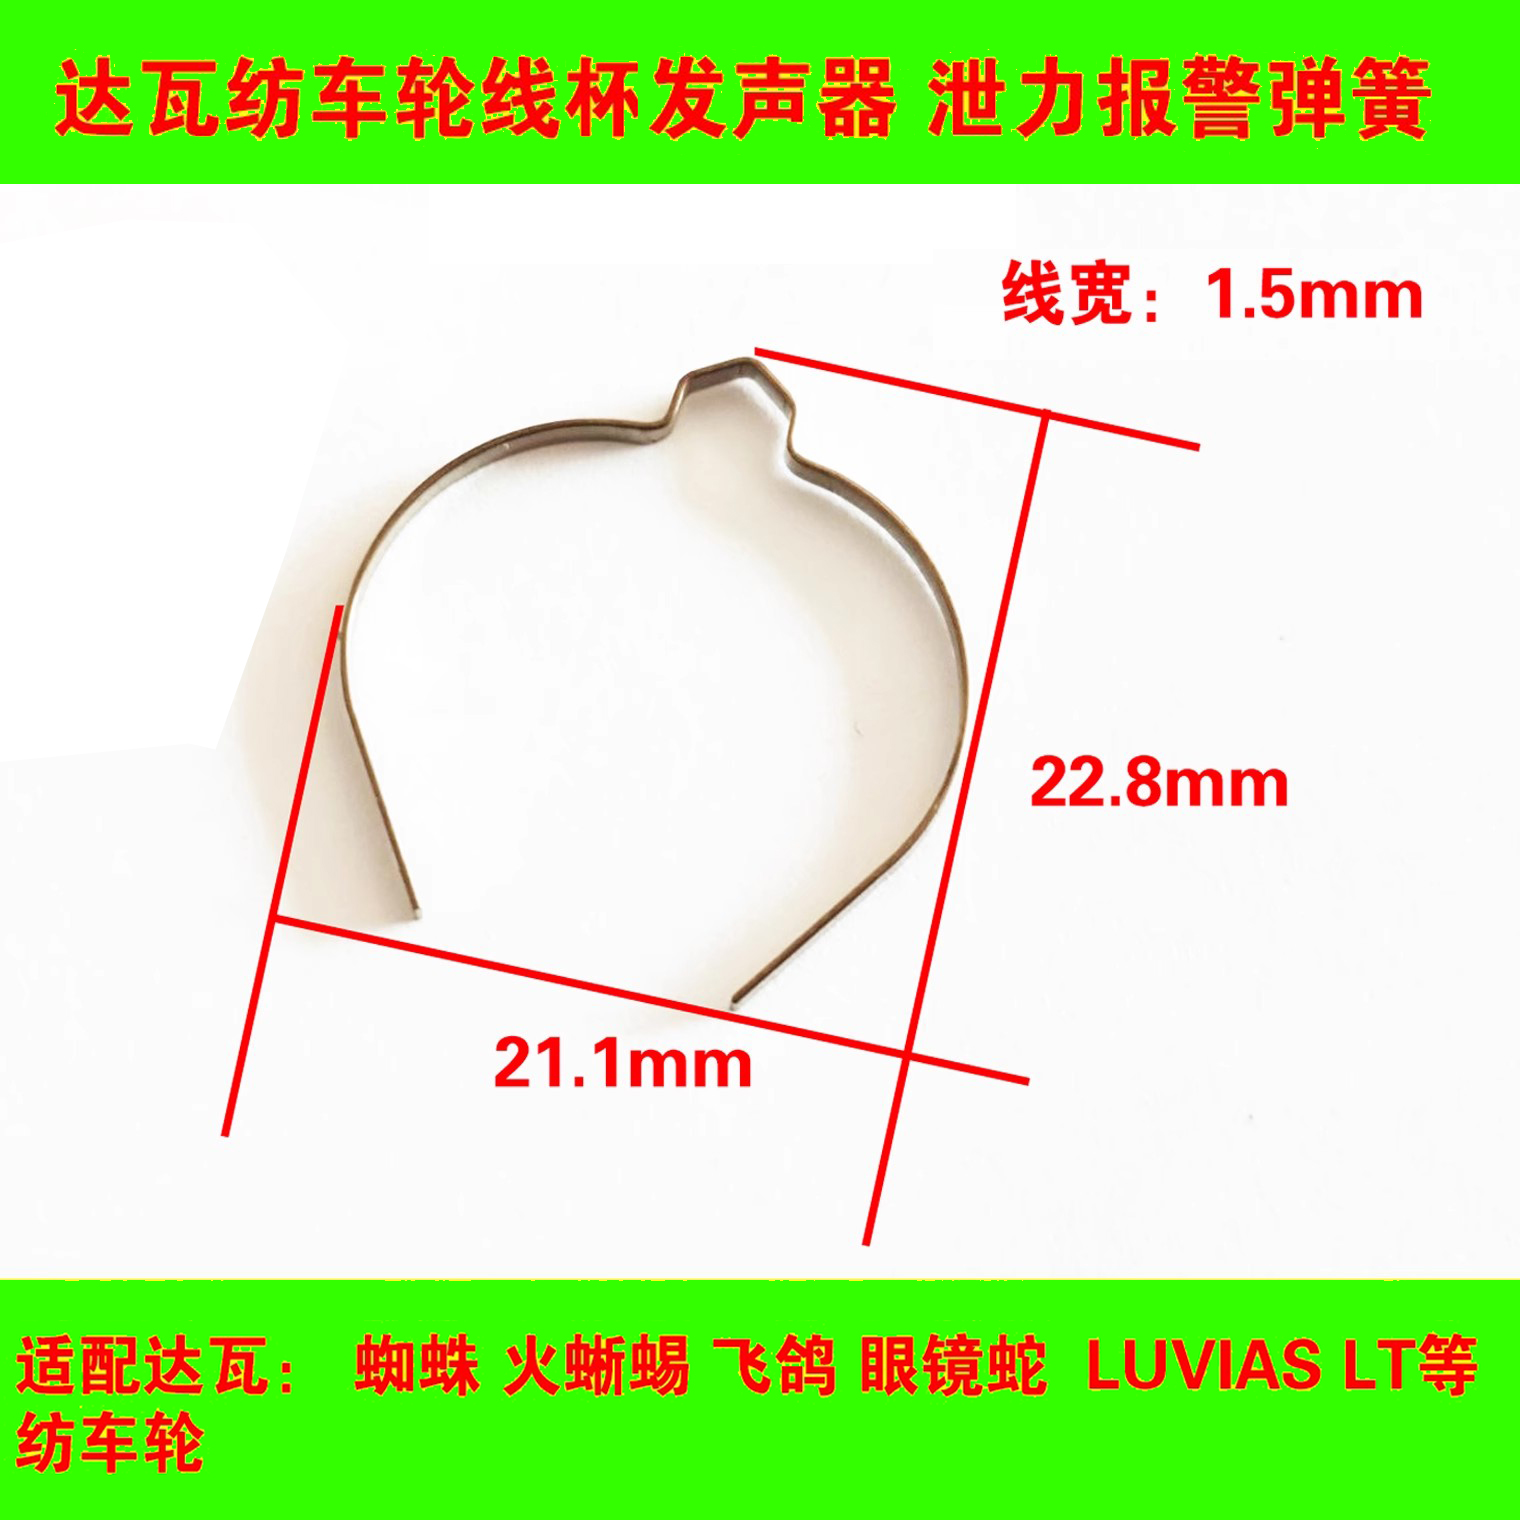 Dava Spider Fire Lizard Fly Dove Glasses Snake LUVIAS Spinning Wheel Wire Cup Sounder Leaky Alarm Spring-Taobao